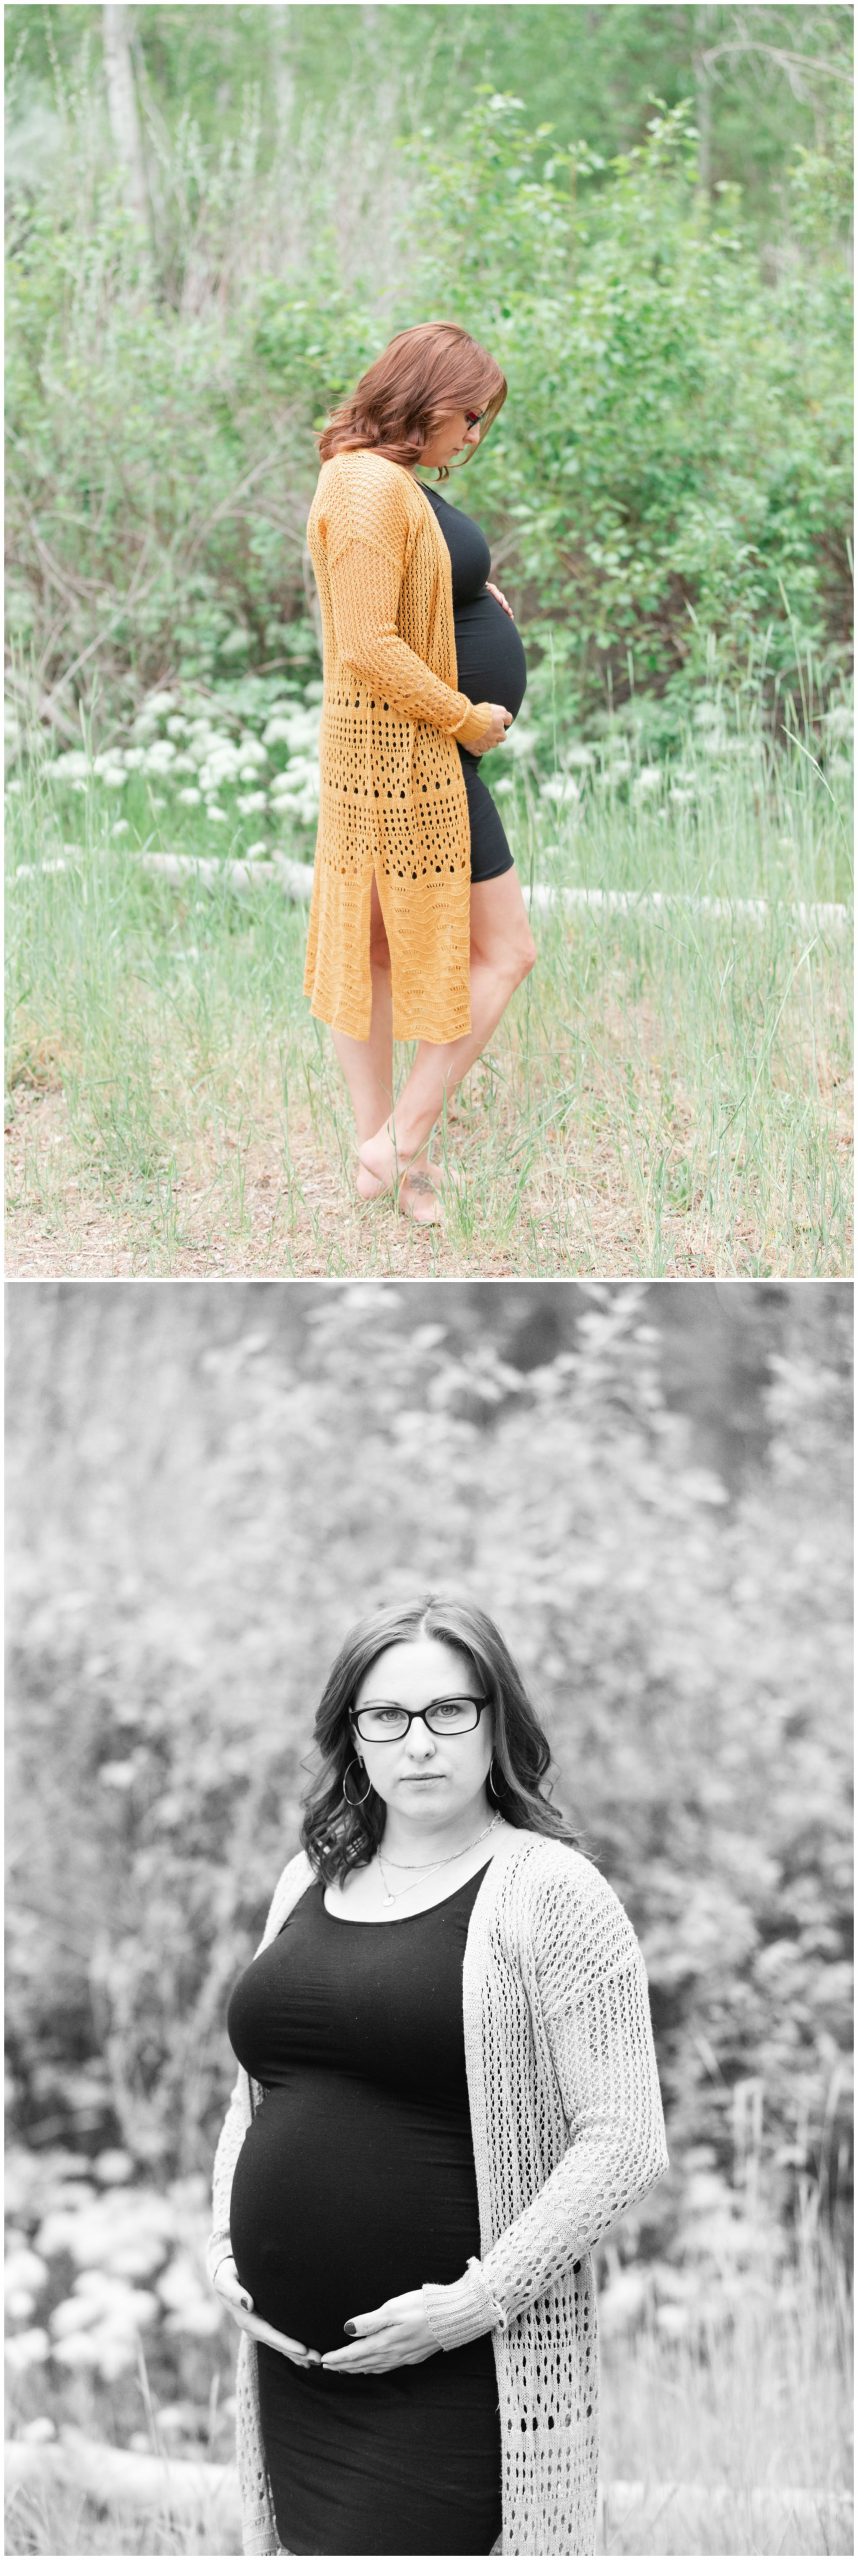 Summer Maternity Picture in Boise Idaho near the Foothills by the Military Reserve. Black and yellow maternity dress on pregnant woman.